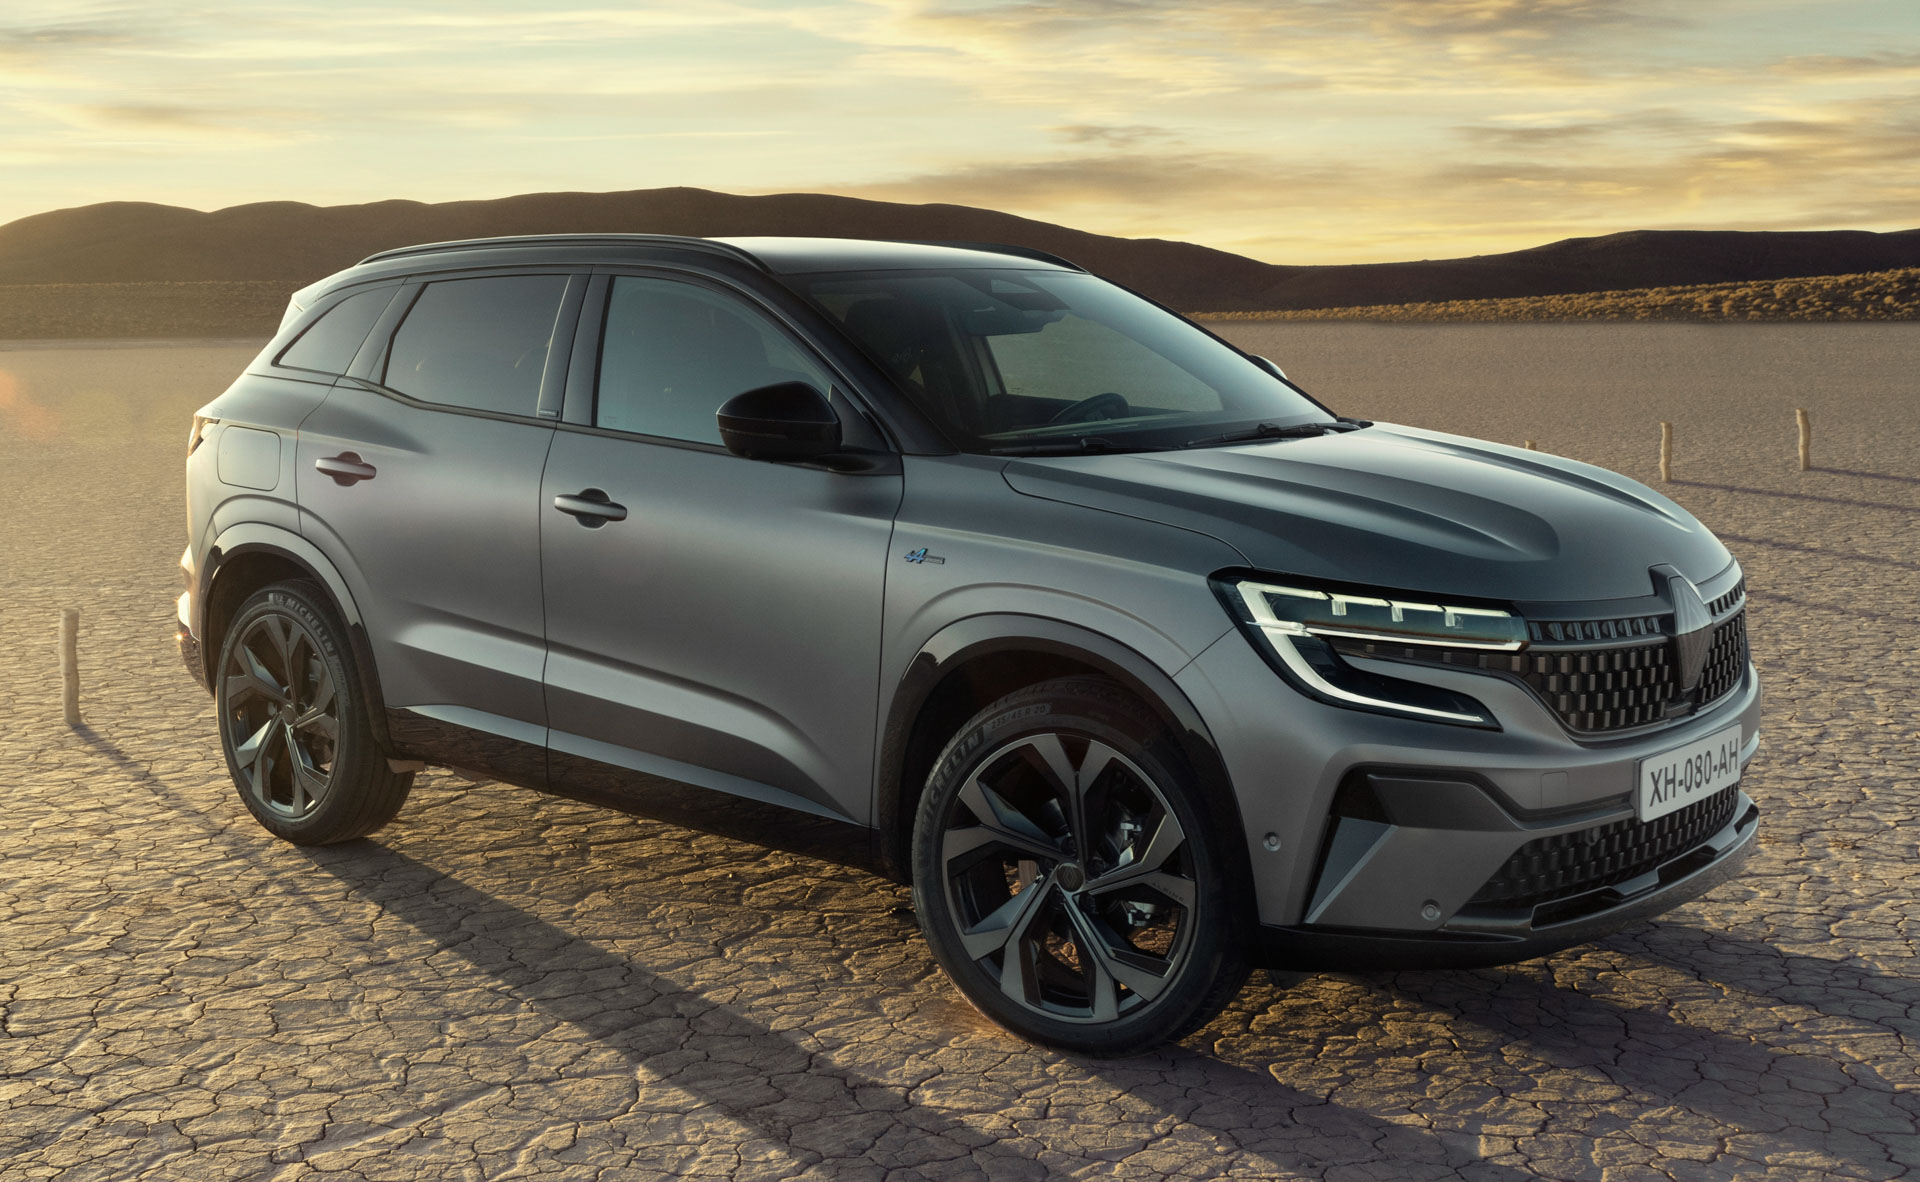 Renault's family-focused Austral resets automaker's compact SUV offerings